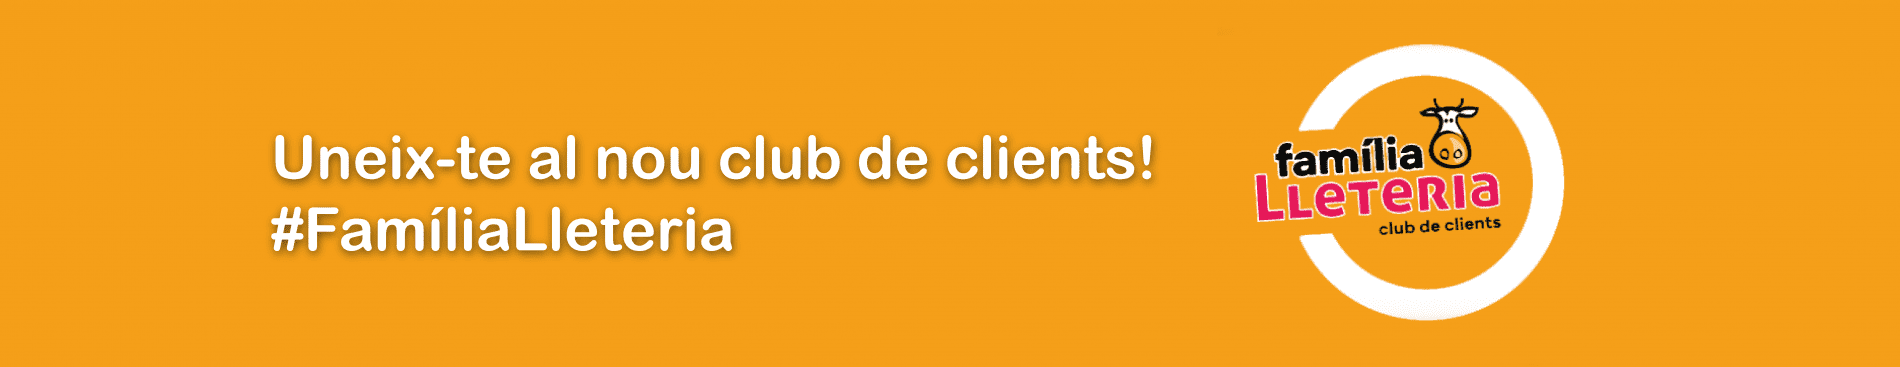 banner_clubclients